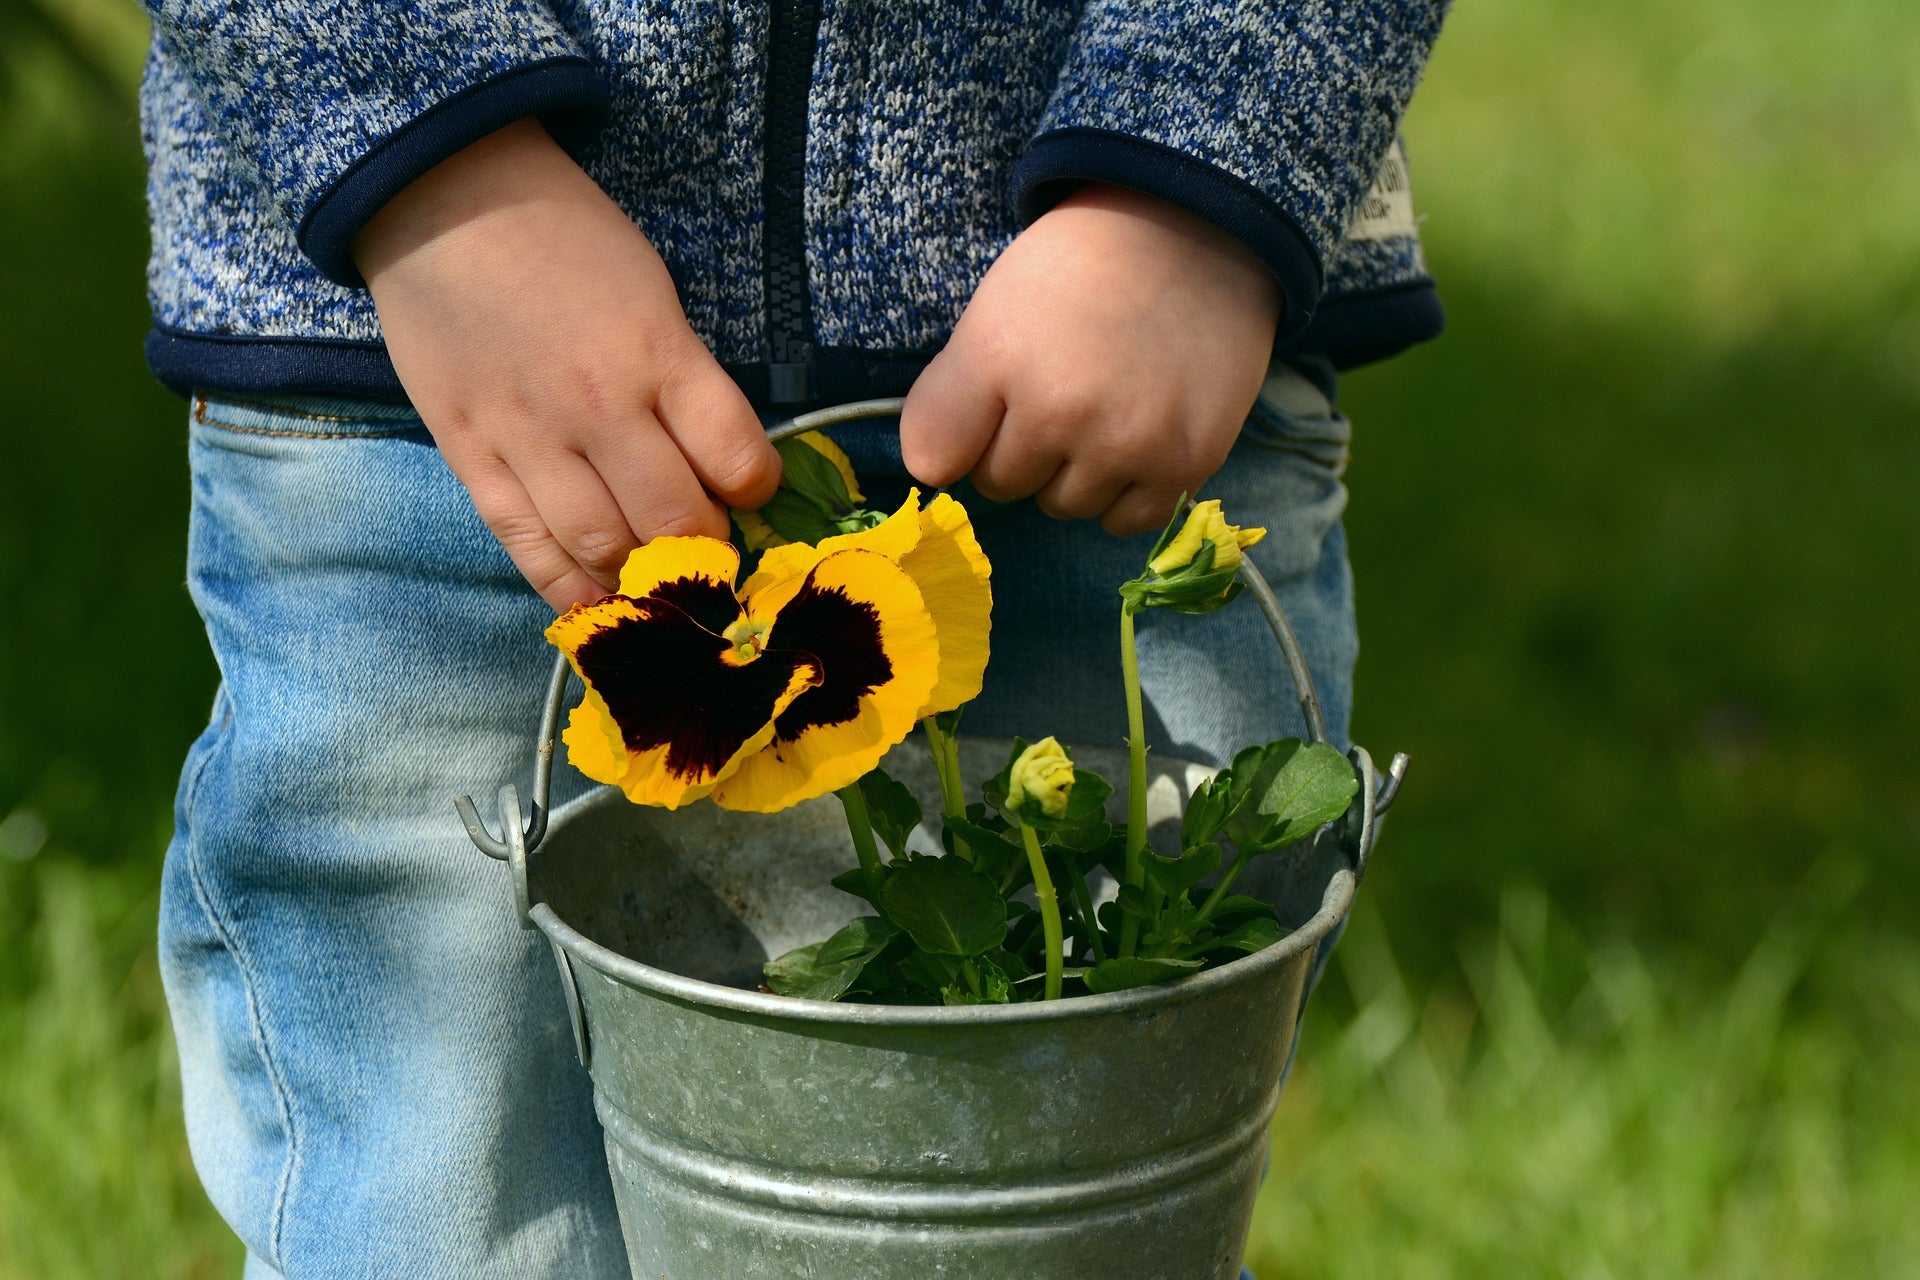 Boy holding silver bucket of yellow pansies